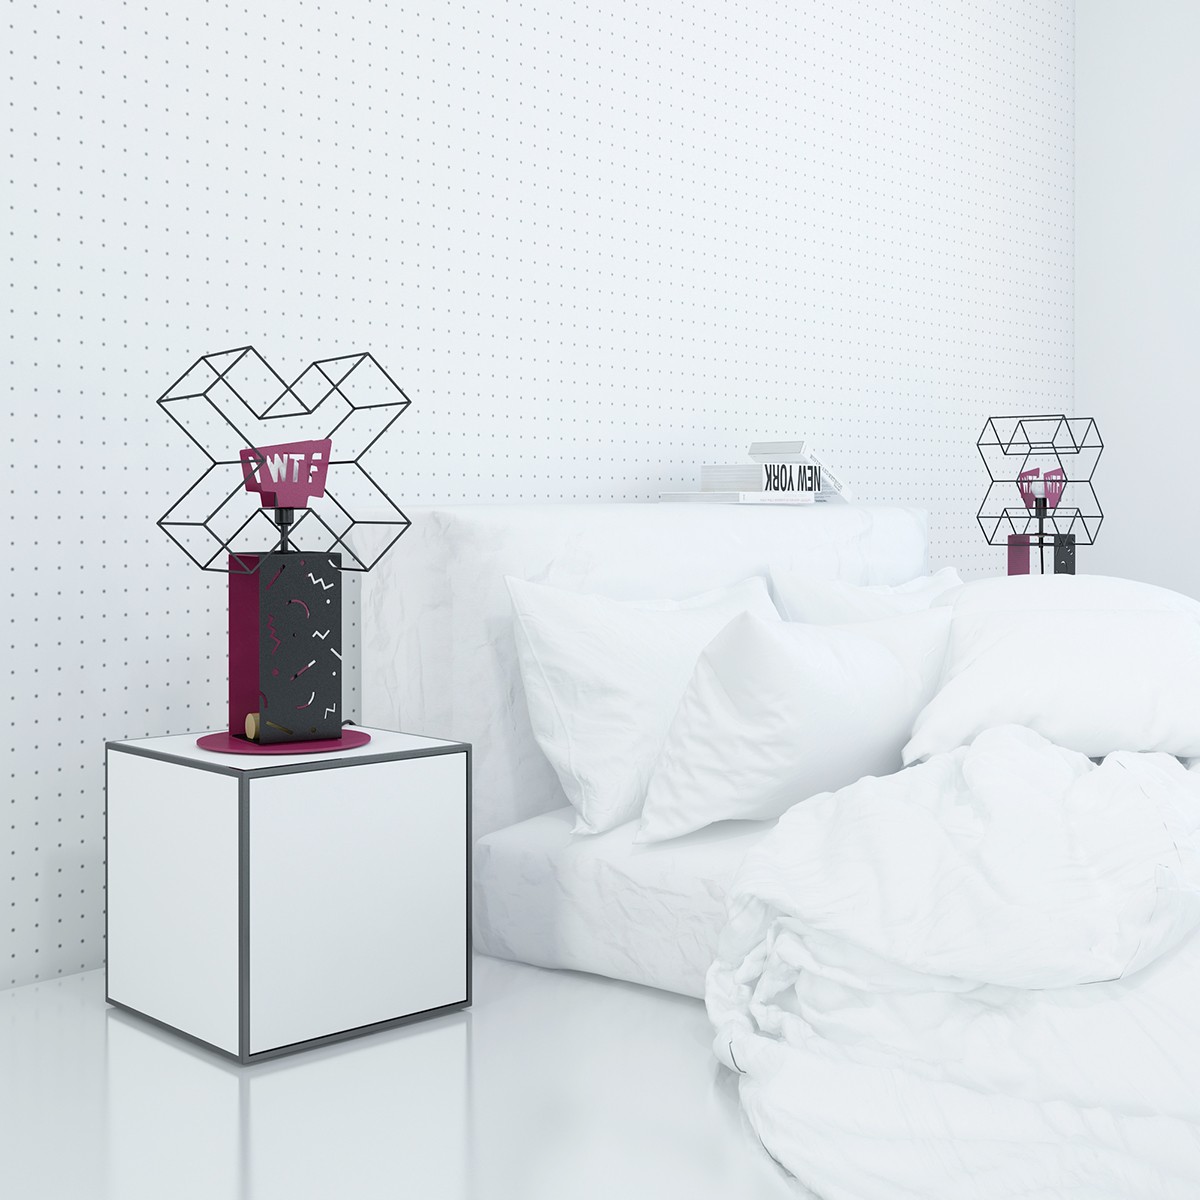 KUBIS lamp collection